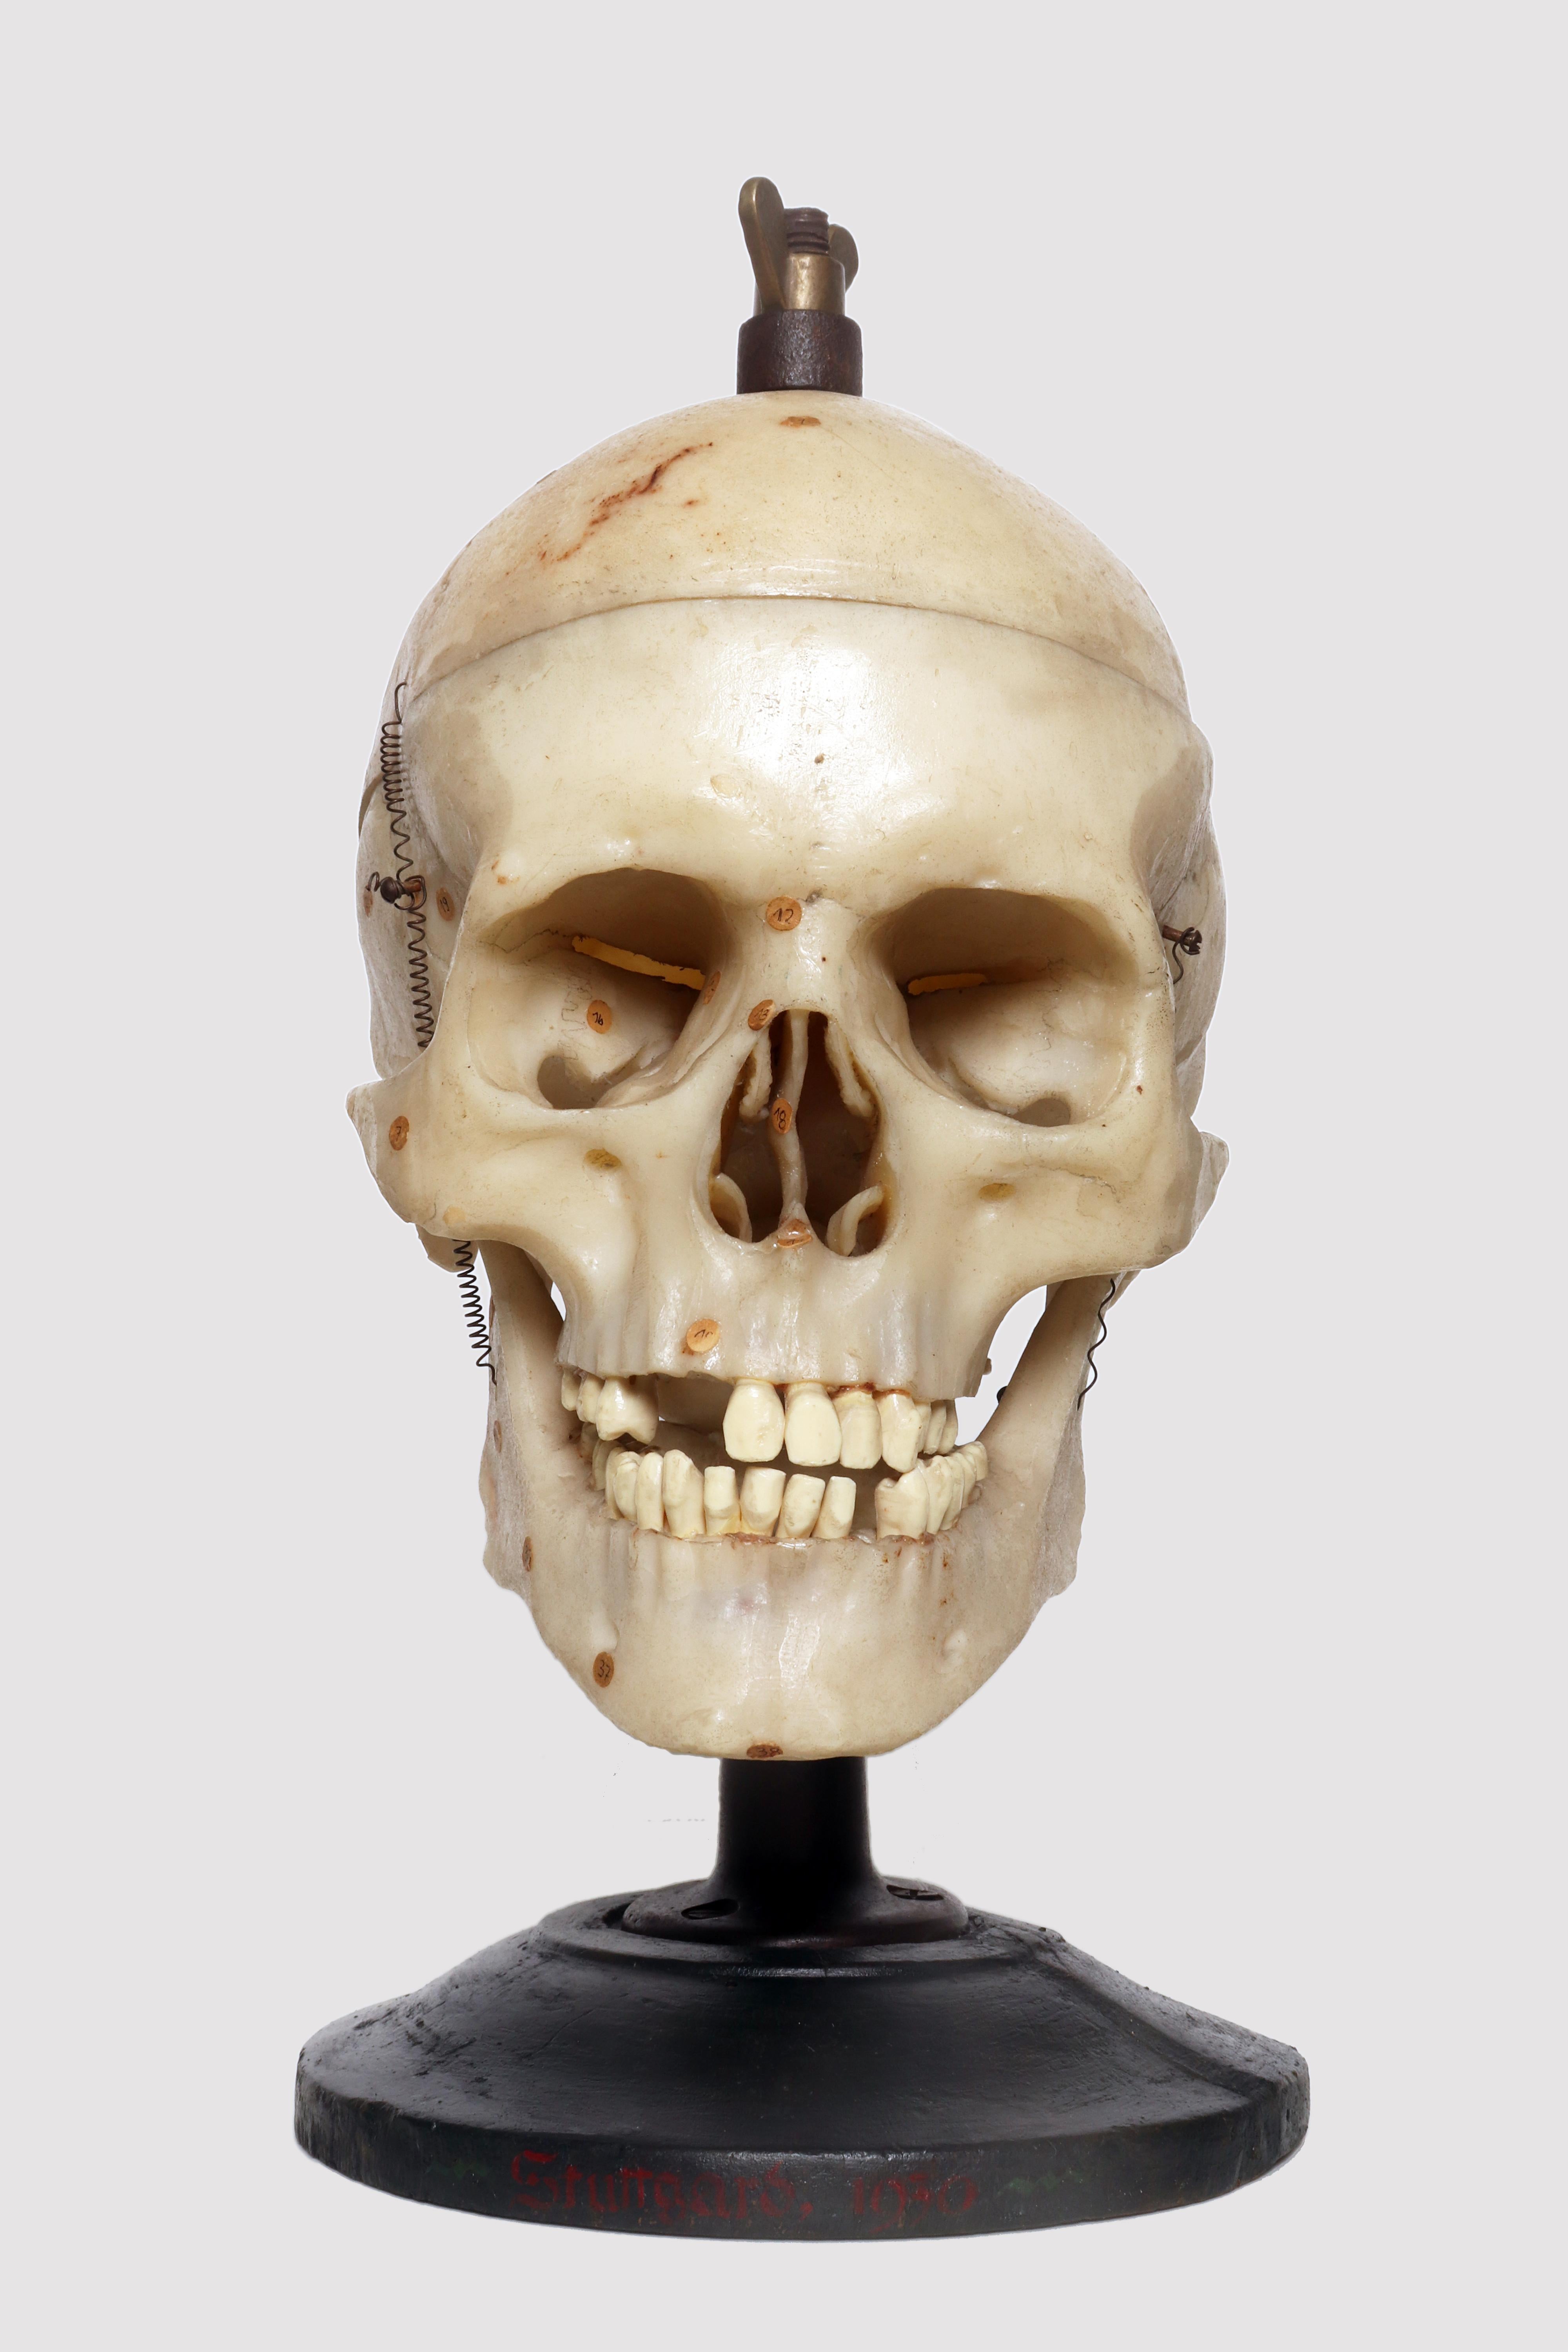 Human skull anatomical model life size 1:1 Model with cranial sutures detachable 2 parts plus three cervical vertebrae for medical educational aid. The skull and vertebrae are made of polyvinyl chloride, with paper reference points, fixed on an iron